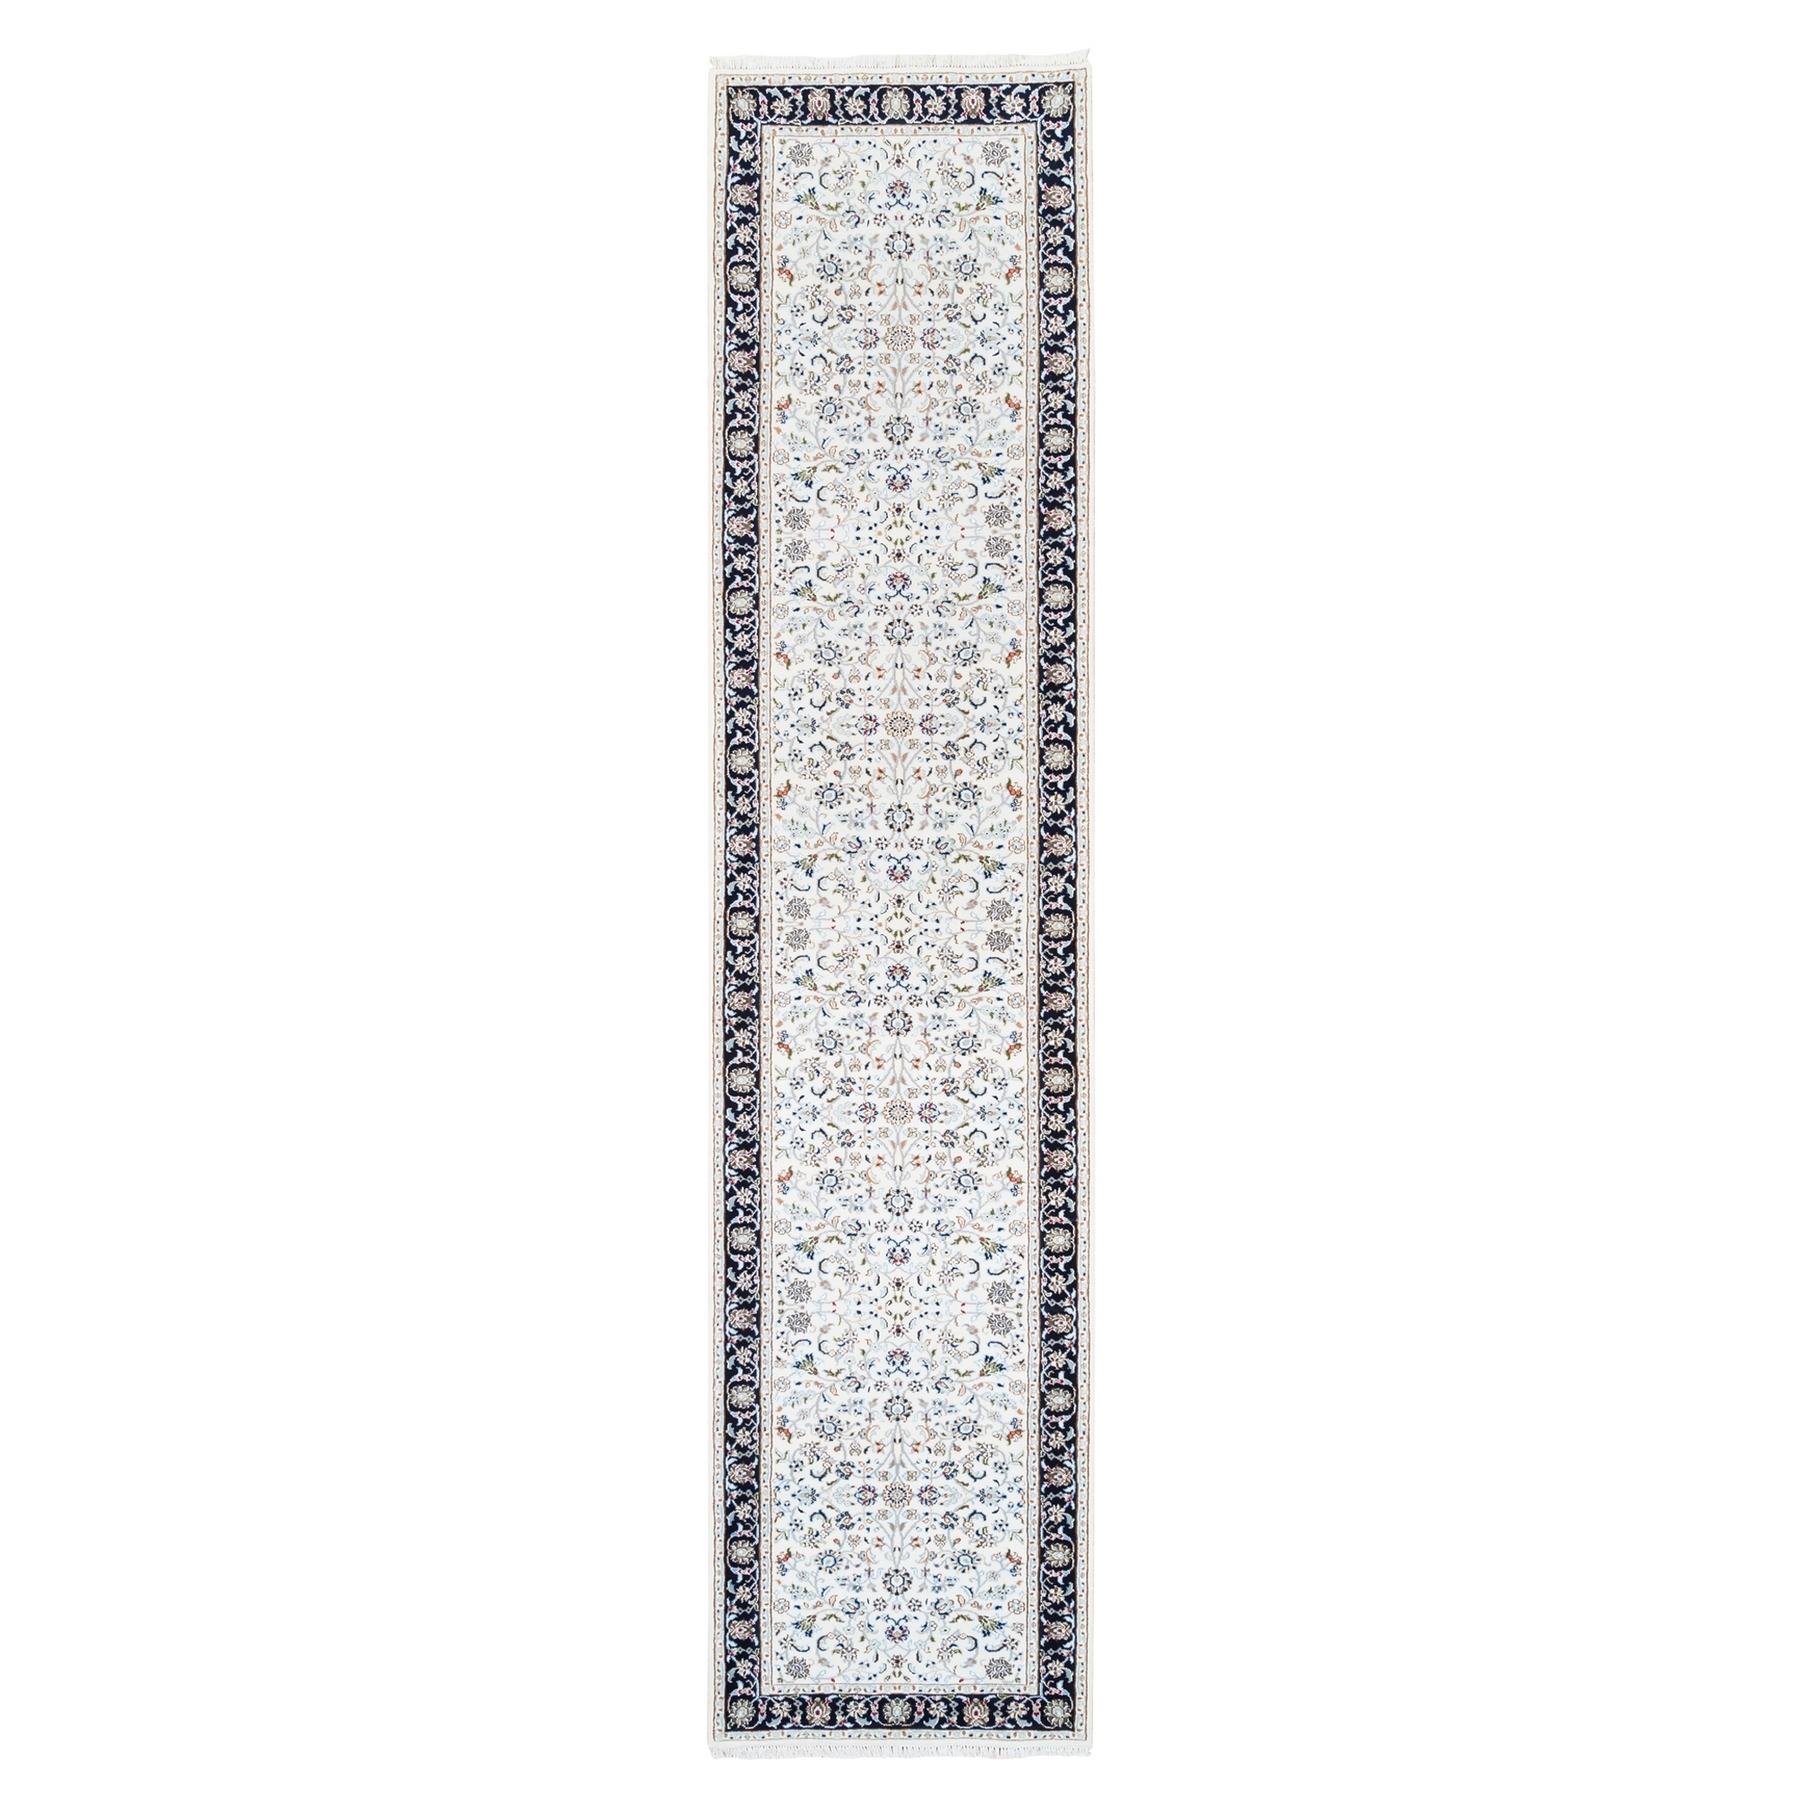 Pirniakan Collection Hand Knotted Ivory Rug No: 1125568